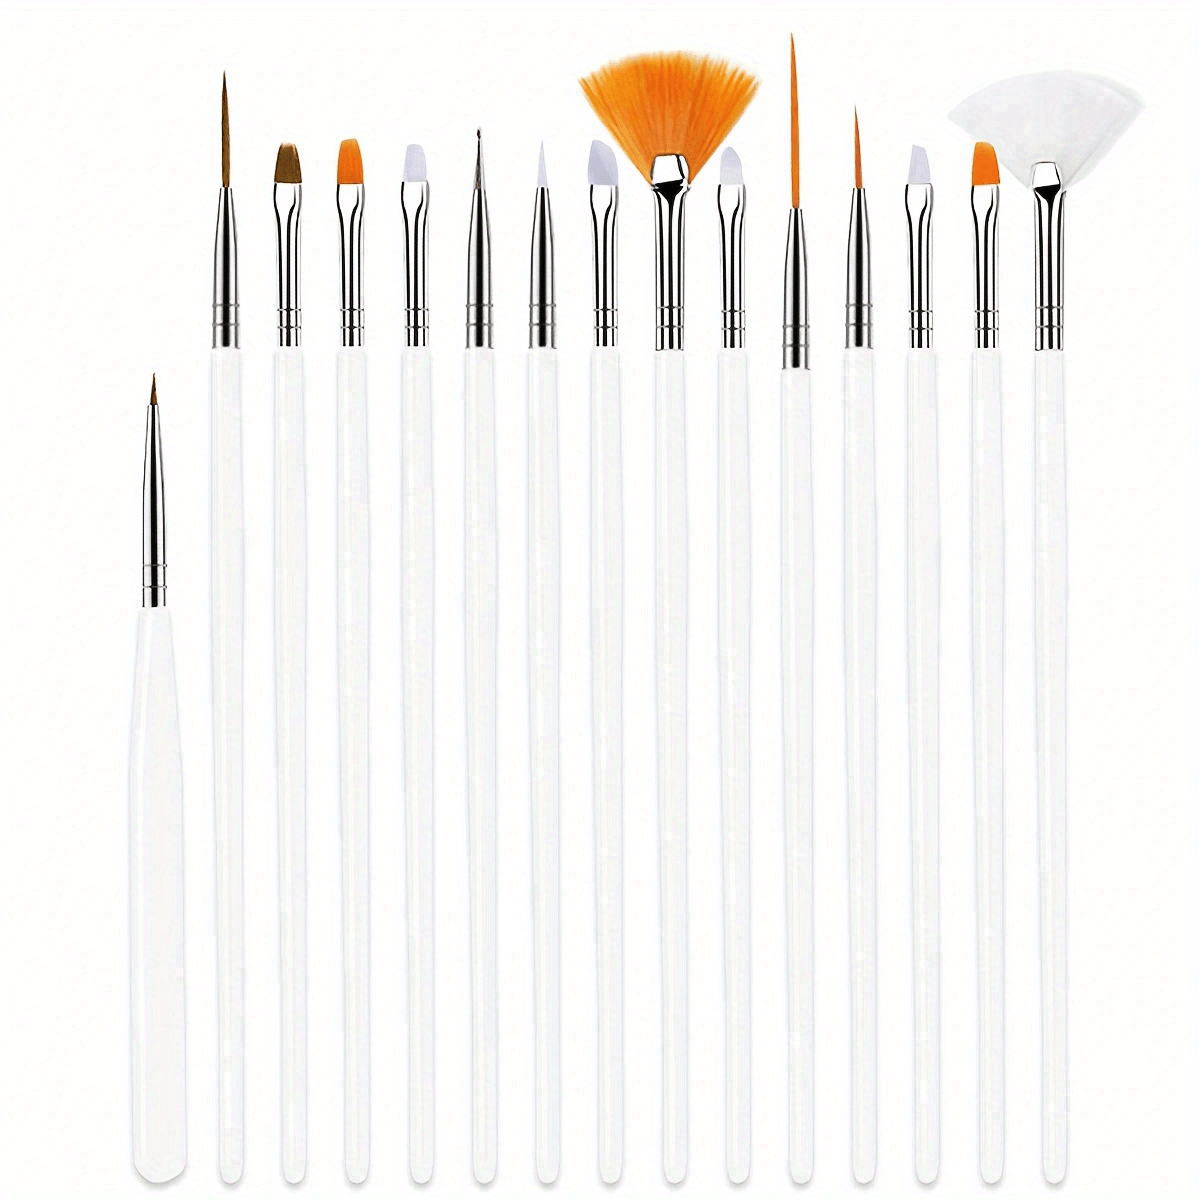 Fine Tip Detail Paint Brushes. Miniature Brushes for Detailing Art for  Acrylic Watercolor Oil - Models, Airplane Kits, Craft, Rock Painting Artist